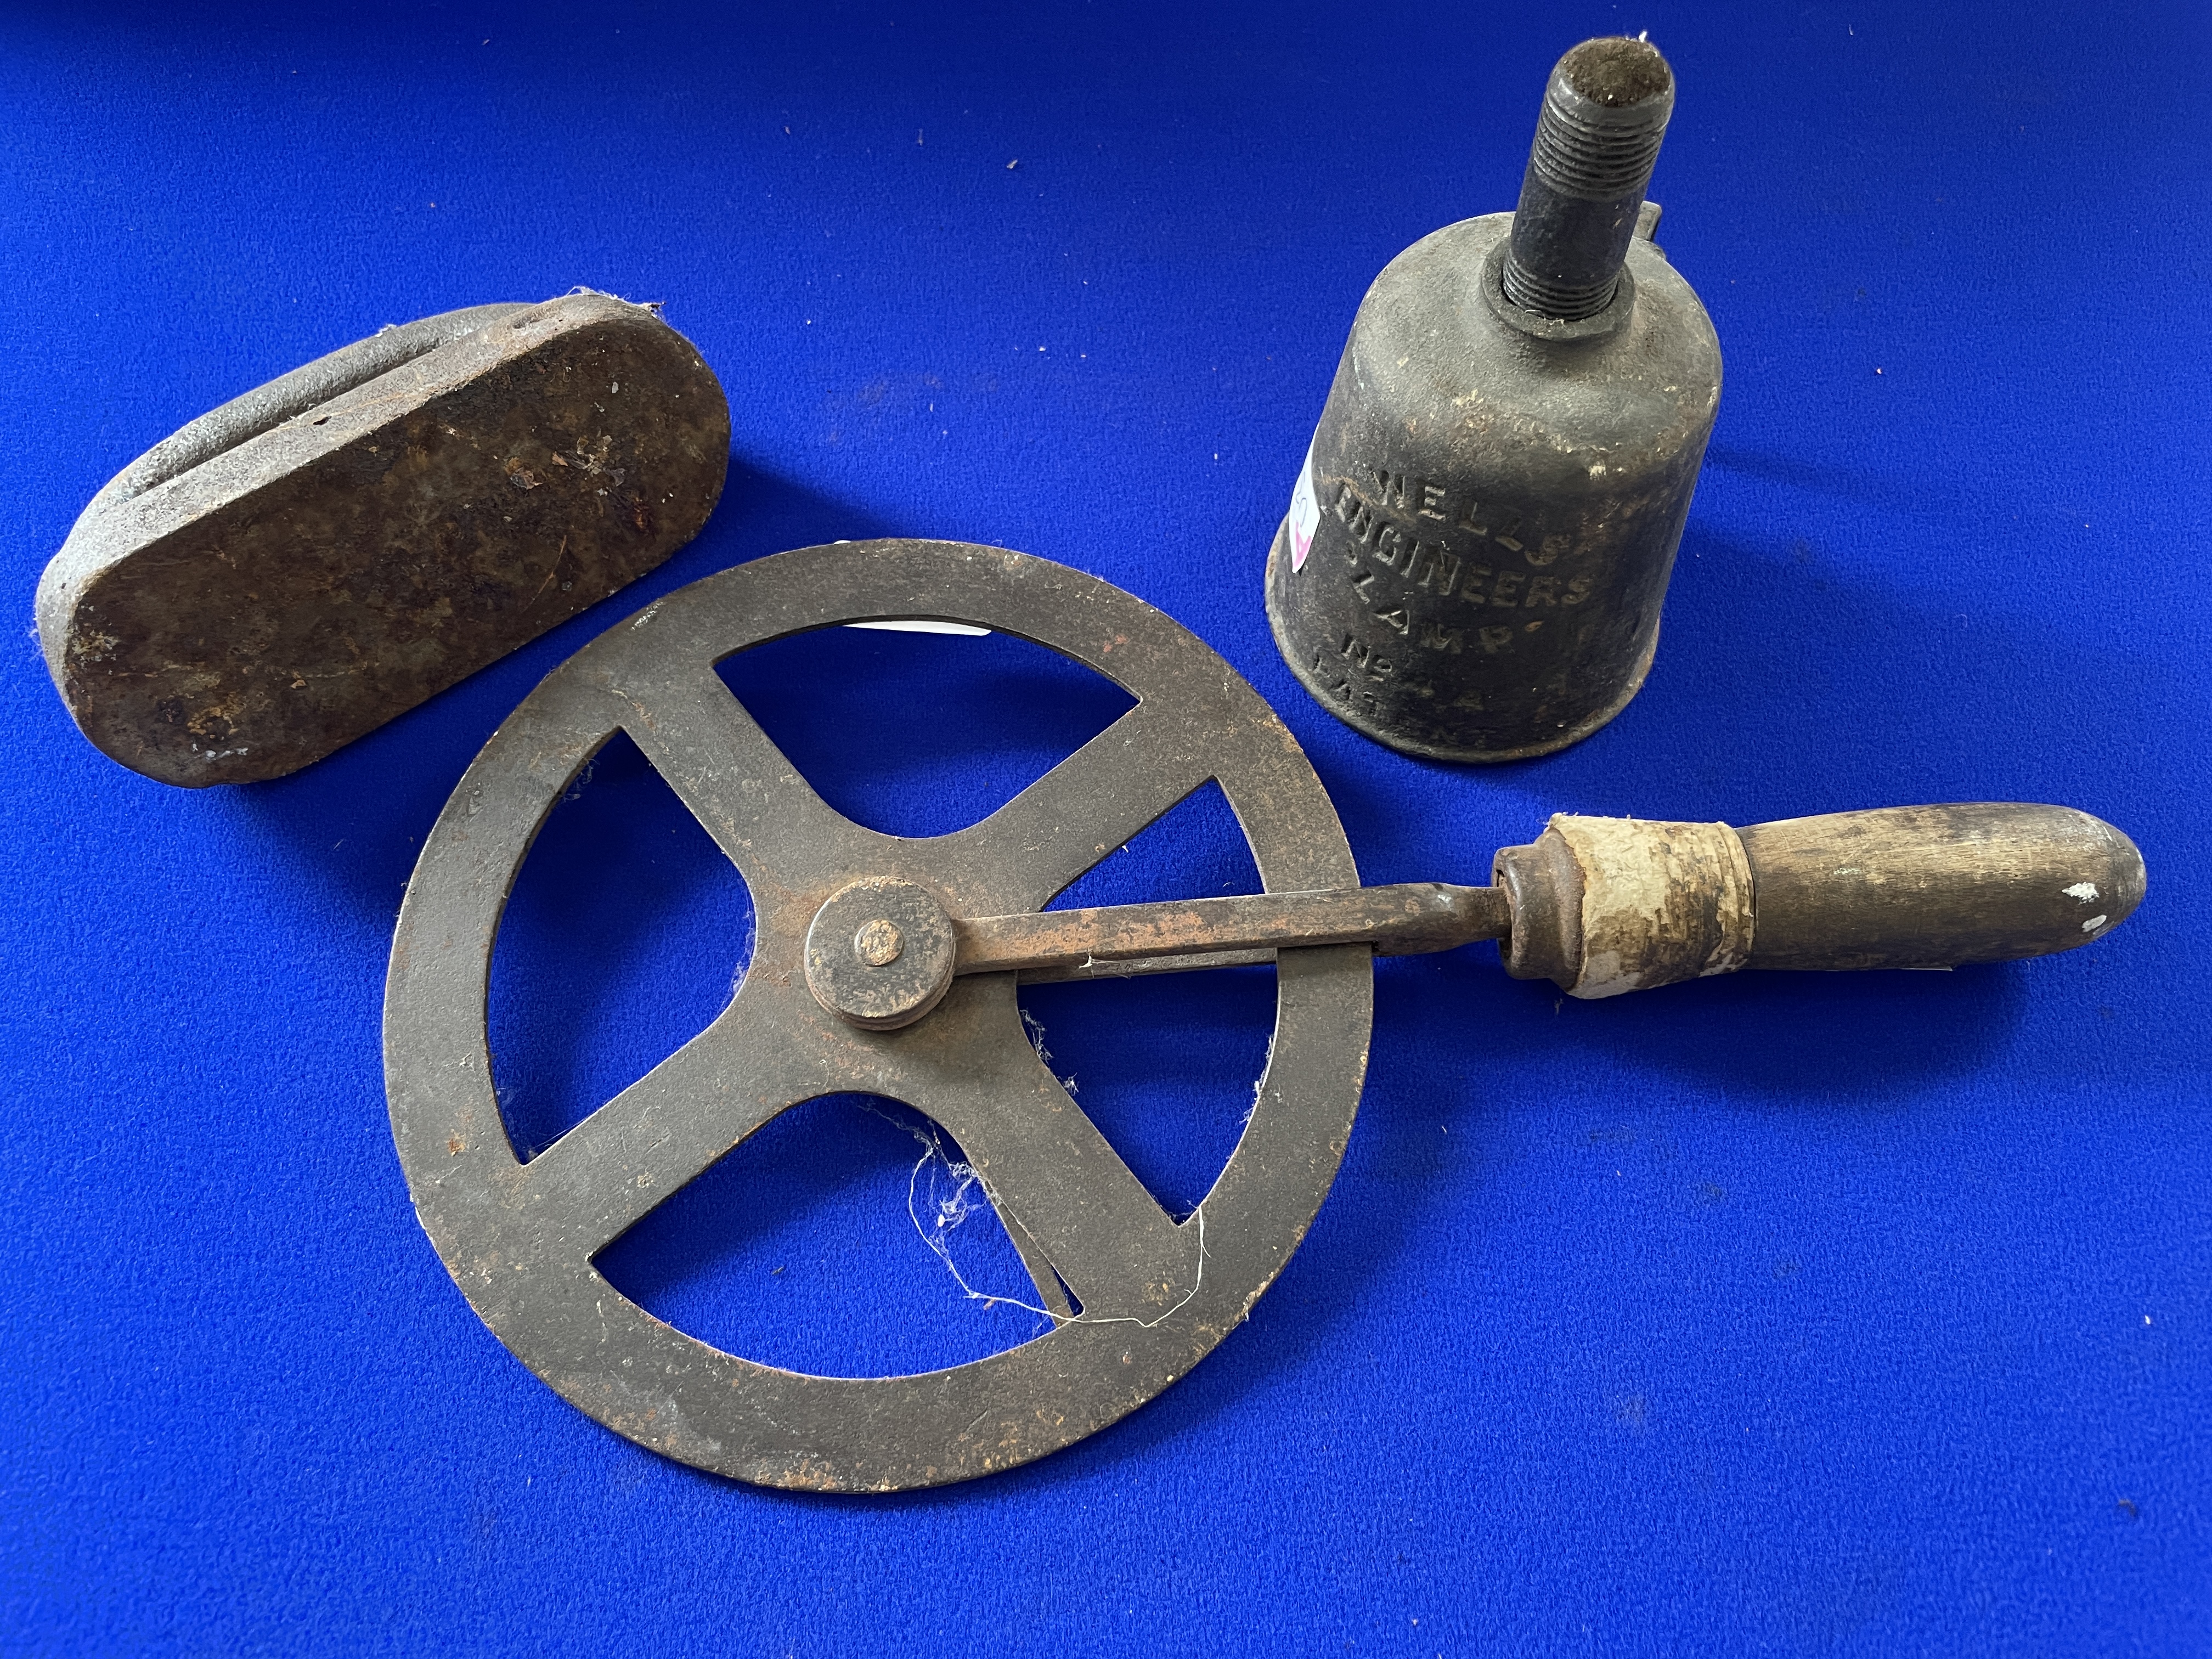 Vintage Measuring Wheel, Engineers Lamp, and an Iron - Image 2 of 2